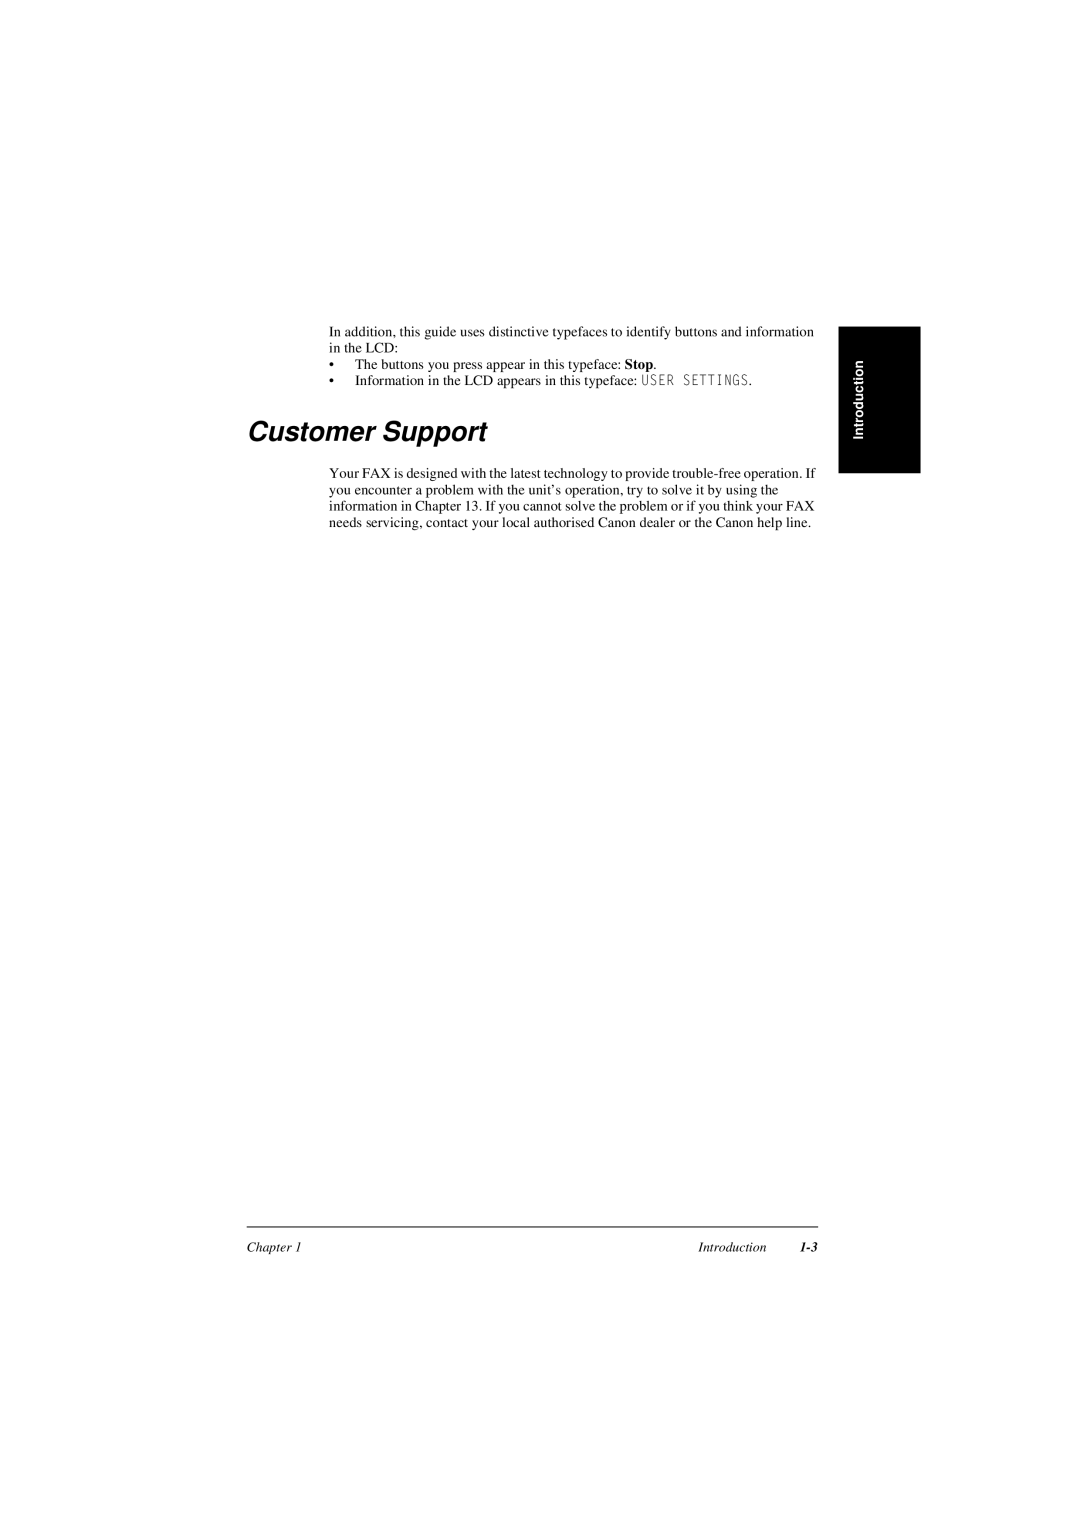 Canon L240, L290 manual Customer Support, The buttons you press appear in this typeface Stop, Introduction, Chapter 